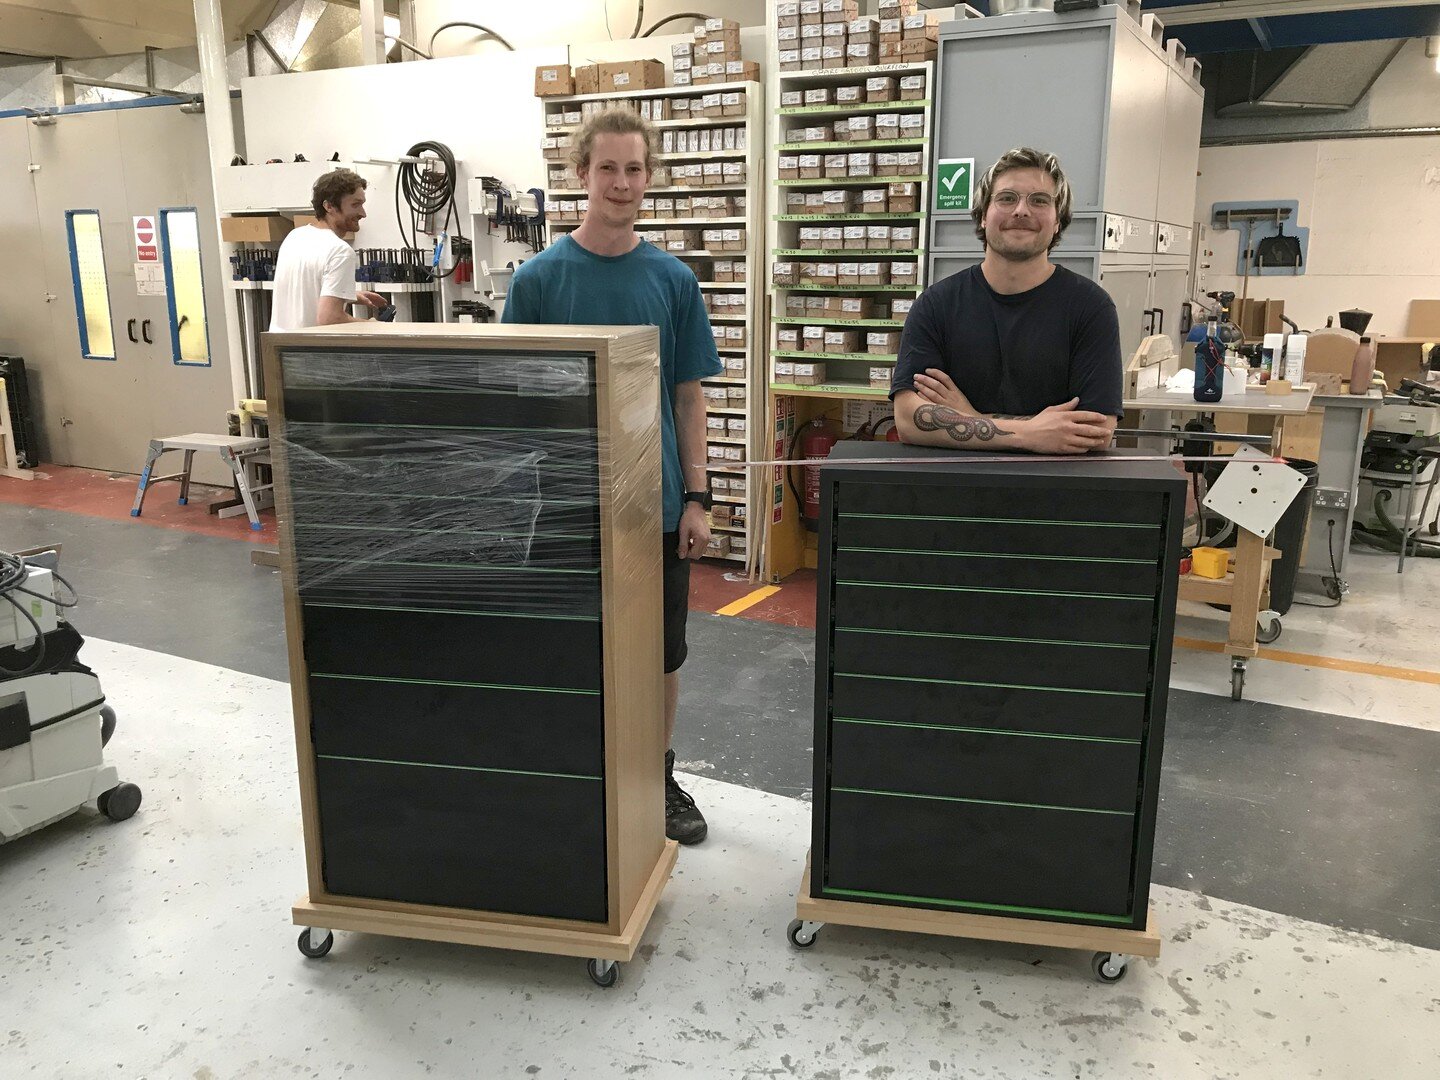 Last week we said goodbye to our 2 summer placement students, Josey and Krav, who spent their last day finishing these custom tool boxes to take away with them. They effortlessly became part of the team and were able to work effectively across many p